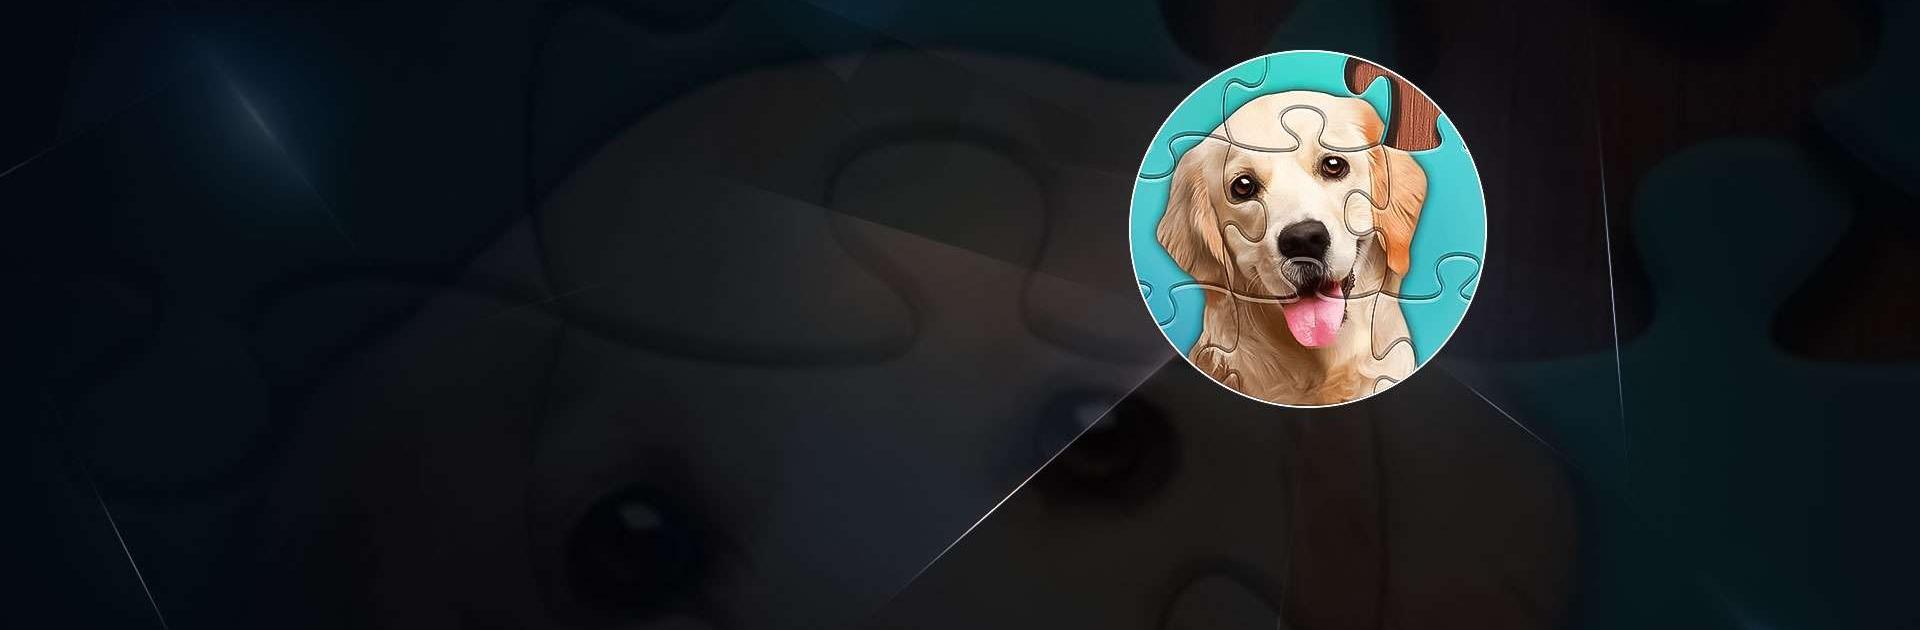 Dogs Jigsaw Puzzles - Apps on Google Play